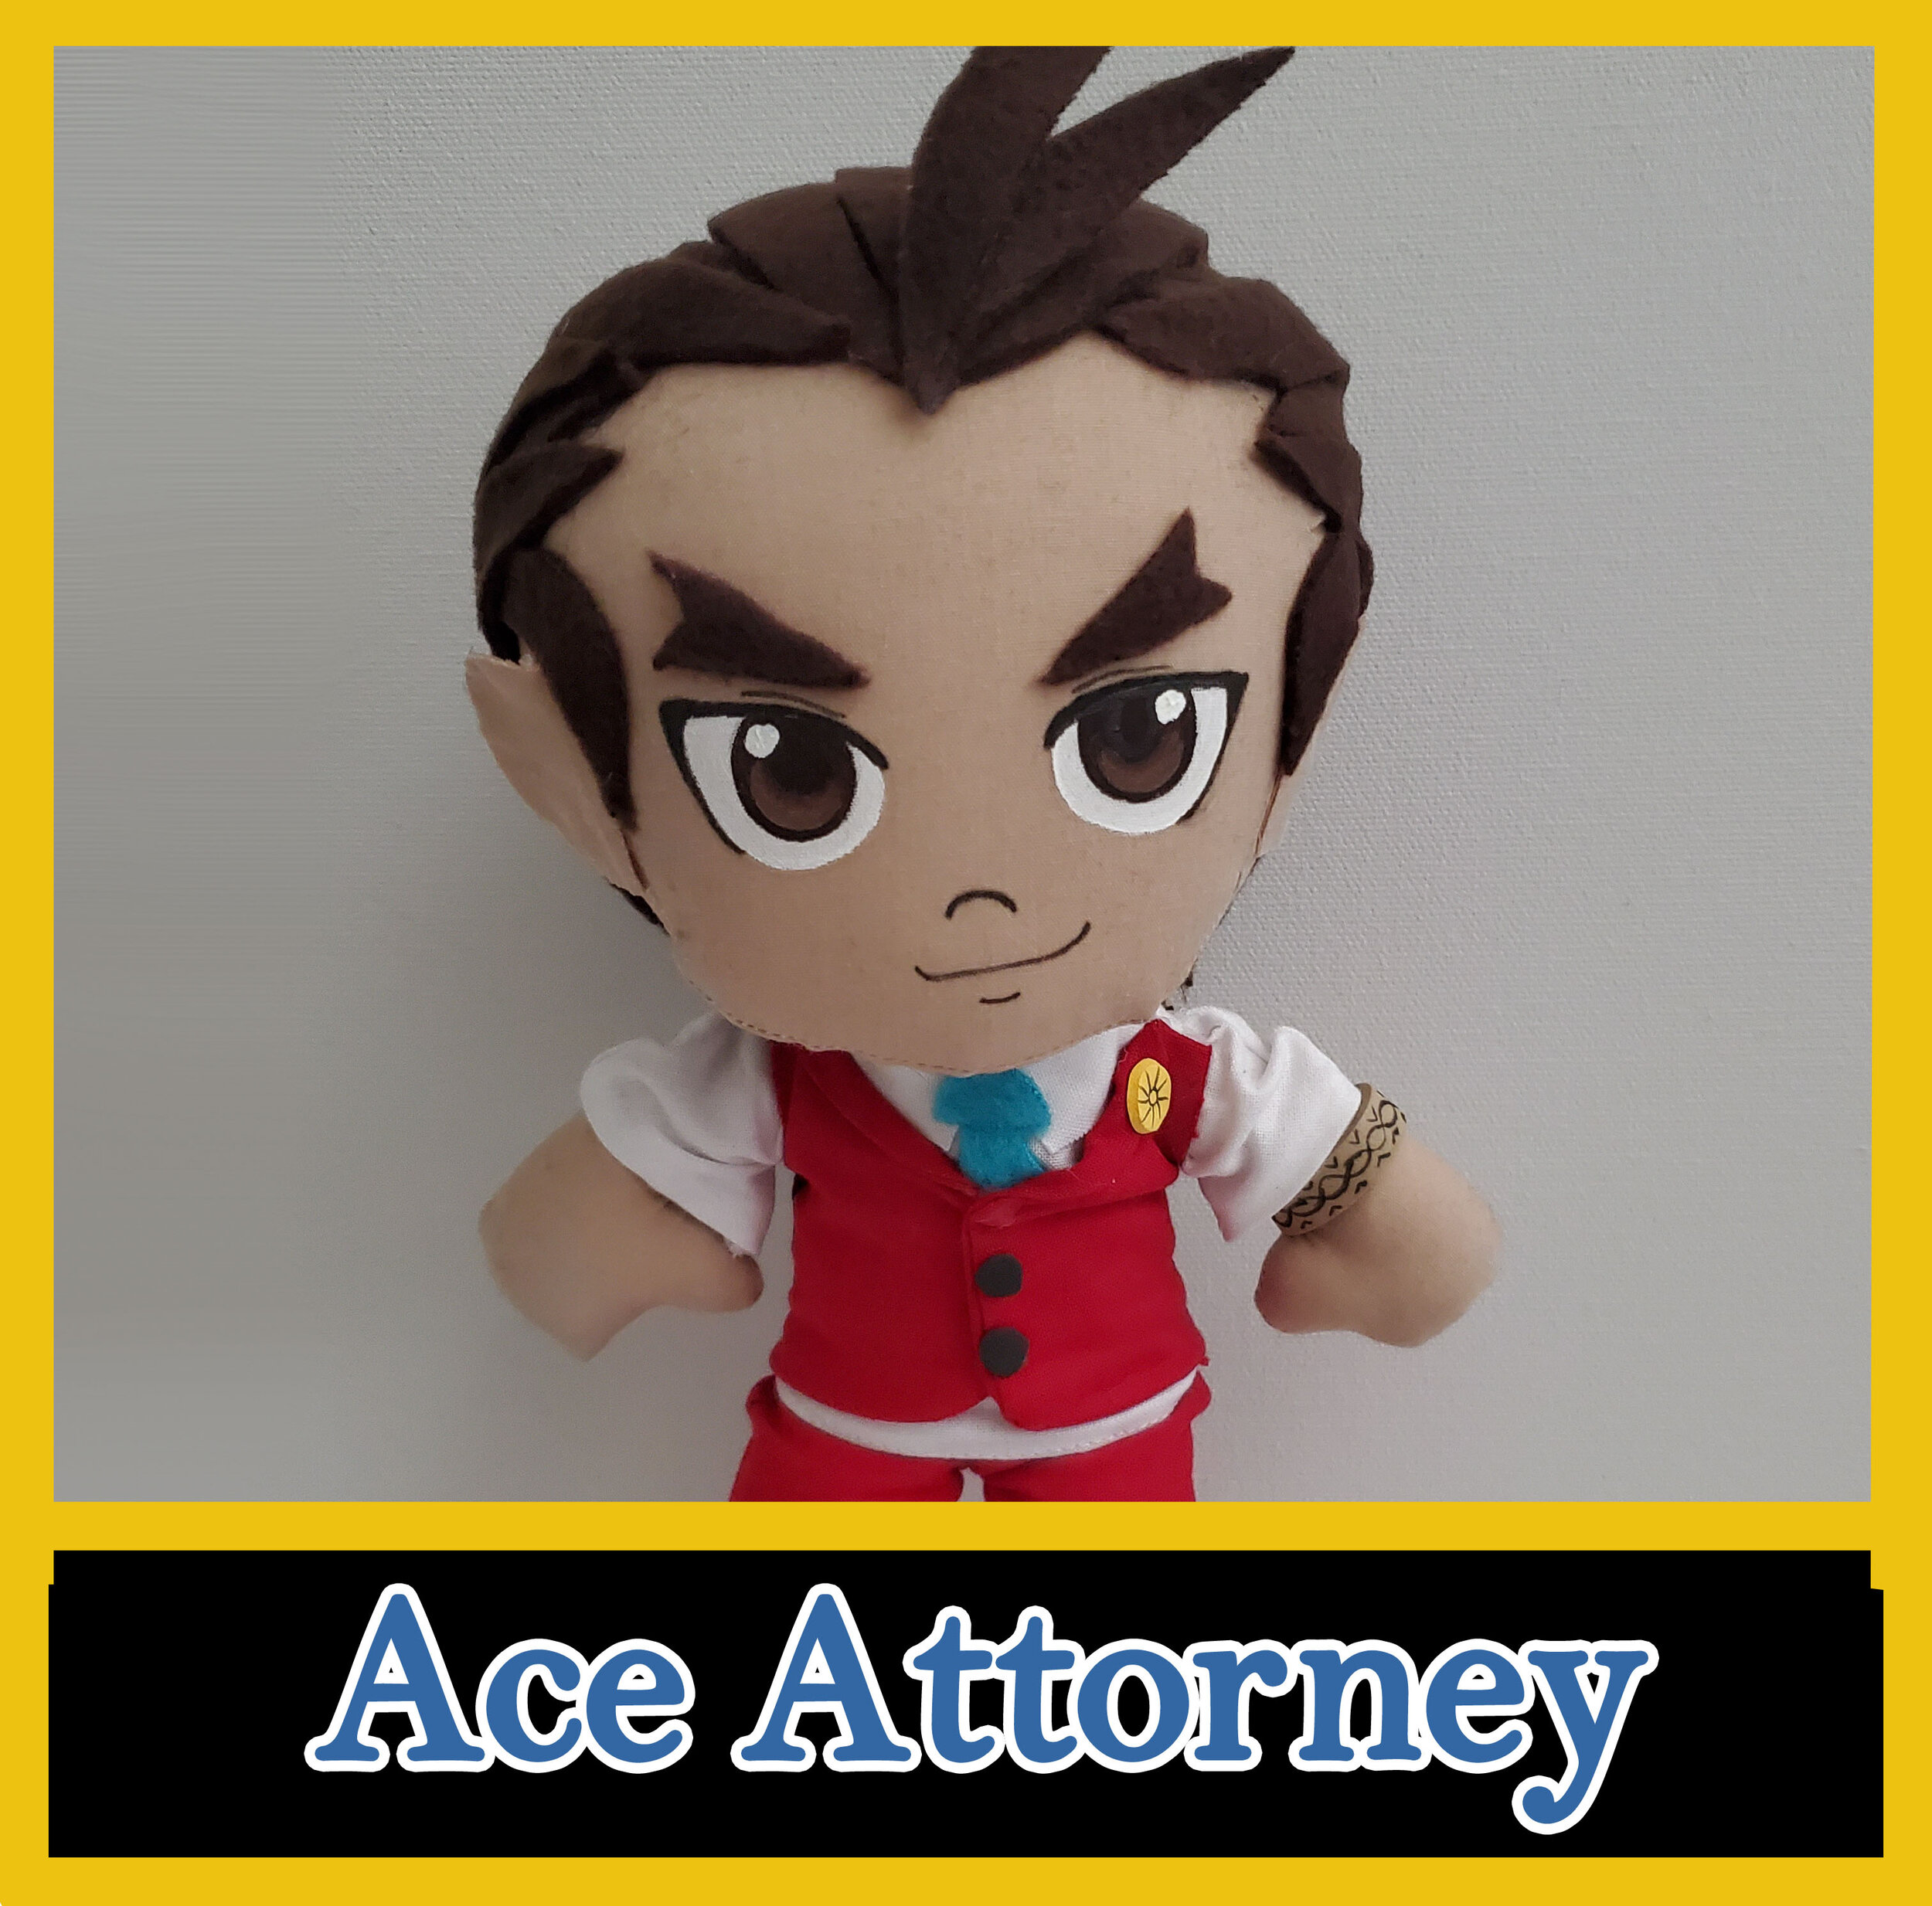 Ace AttorneyHubPic.jpg